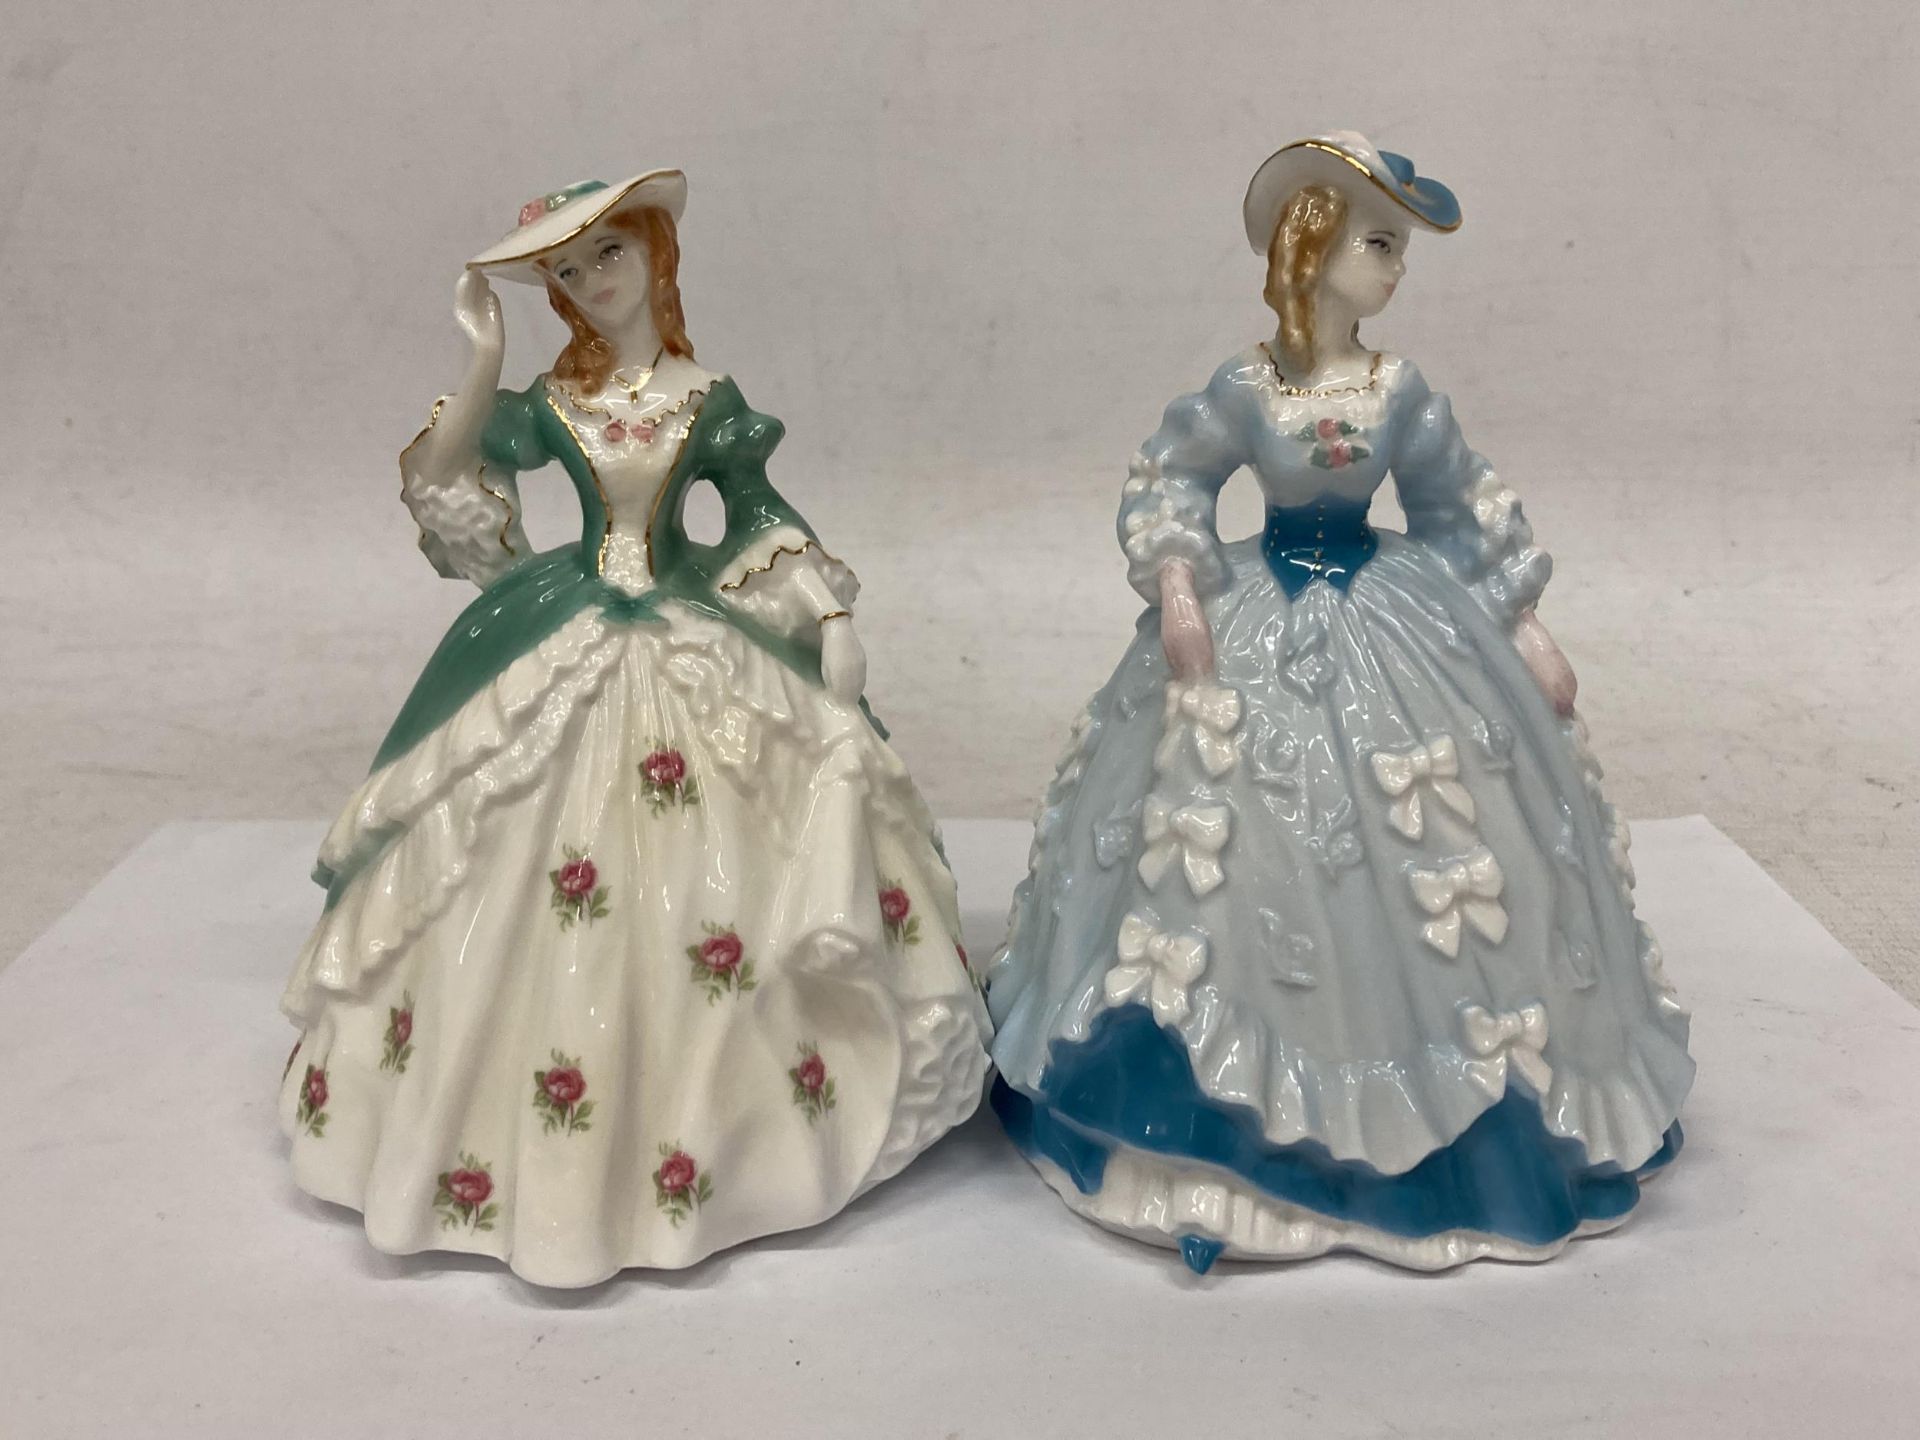 TWO ROYAL WORCESTER FIGURINES FROM THE FASIONABLE VICTORIANS COLLECTION "LADY SARAH" LIMITED EDITION